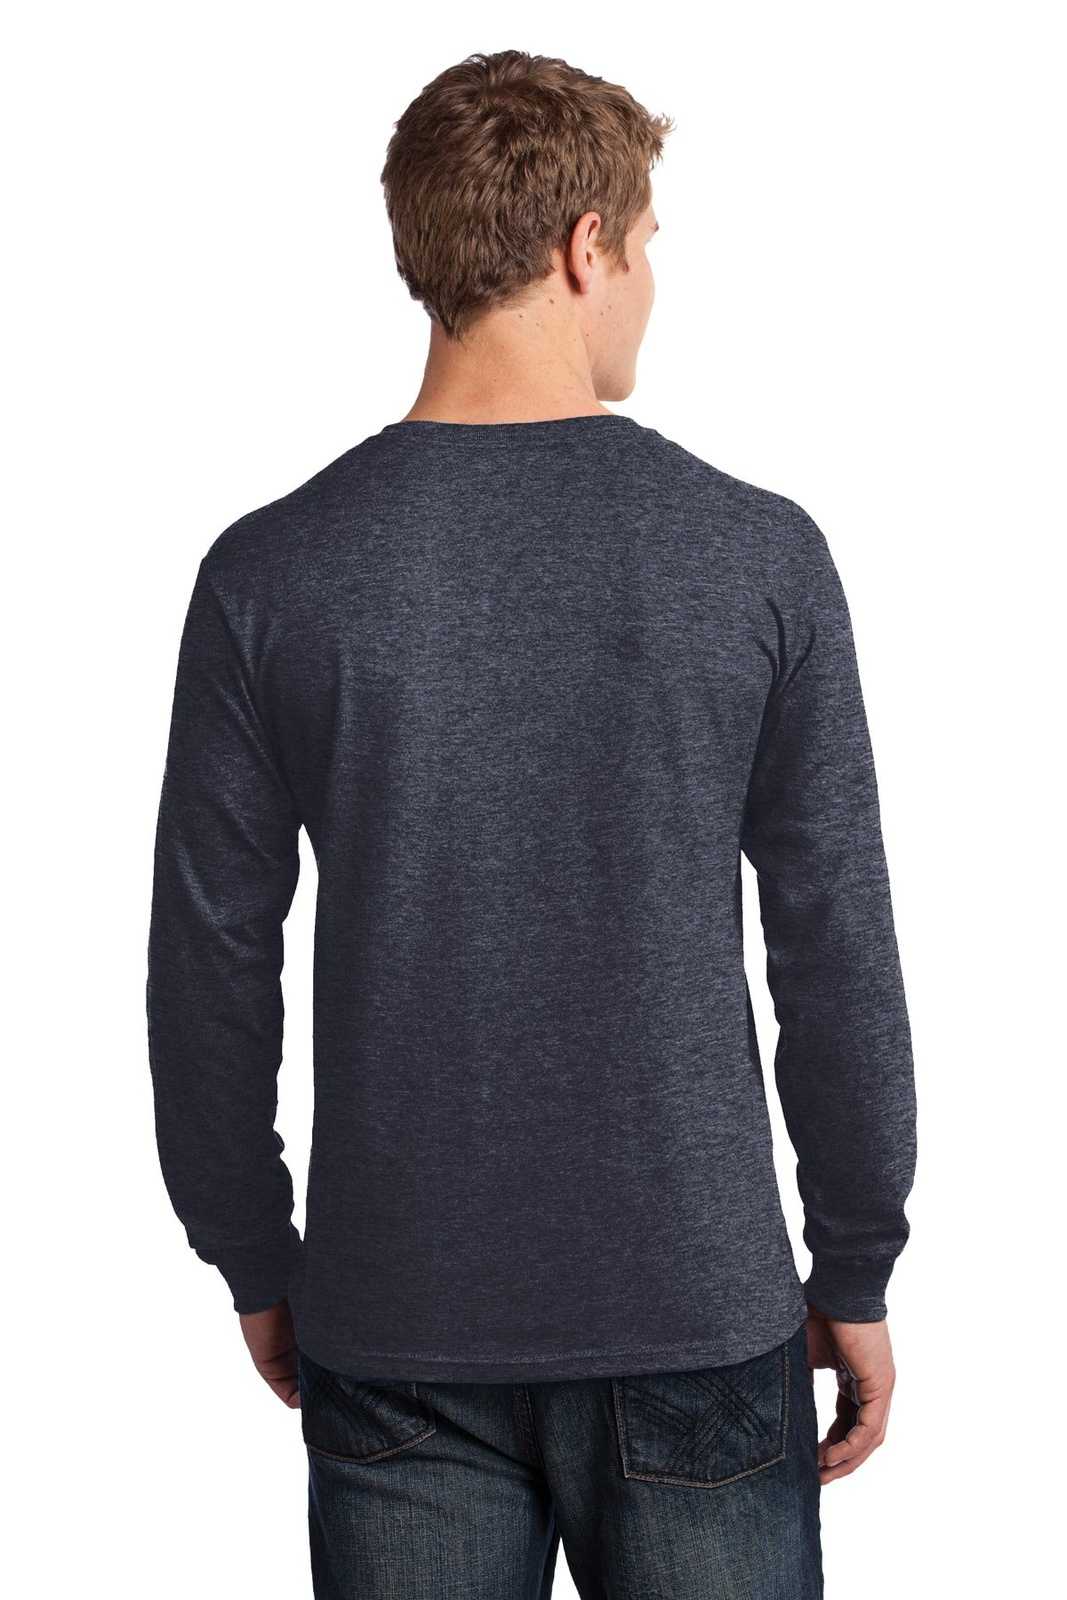 Port & Company PC54LS Long Sleeve Core Cotton Tee - Heather Navy - HIT a Double - 1